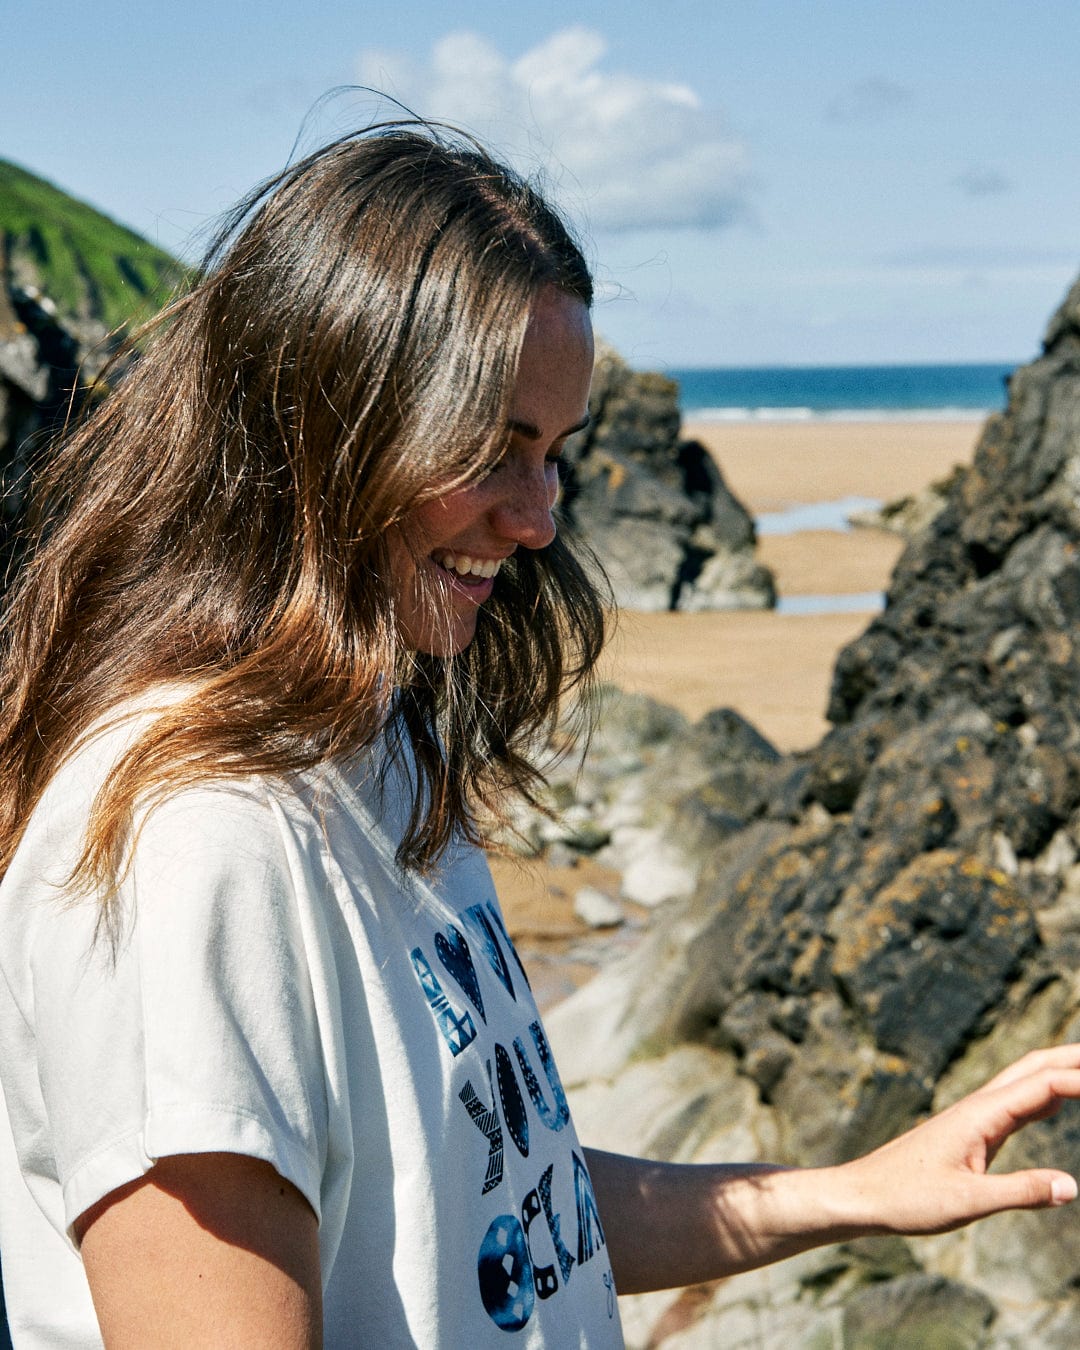 A person with long hair smiles while standing on a rocky beach on a sunny day. They wear a loose fit outfit, perfect for the breezy weather, made from recycled material. In the background, the ocean and sandy shore remind us to Love Your Ocean - Recycled Womens T-Shirt - White by Saltrock.